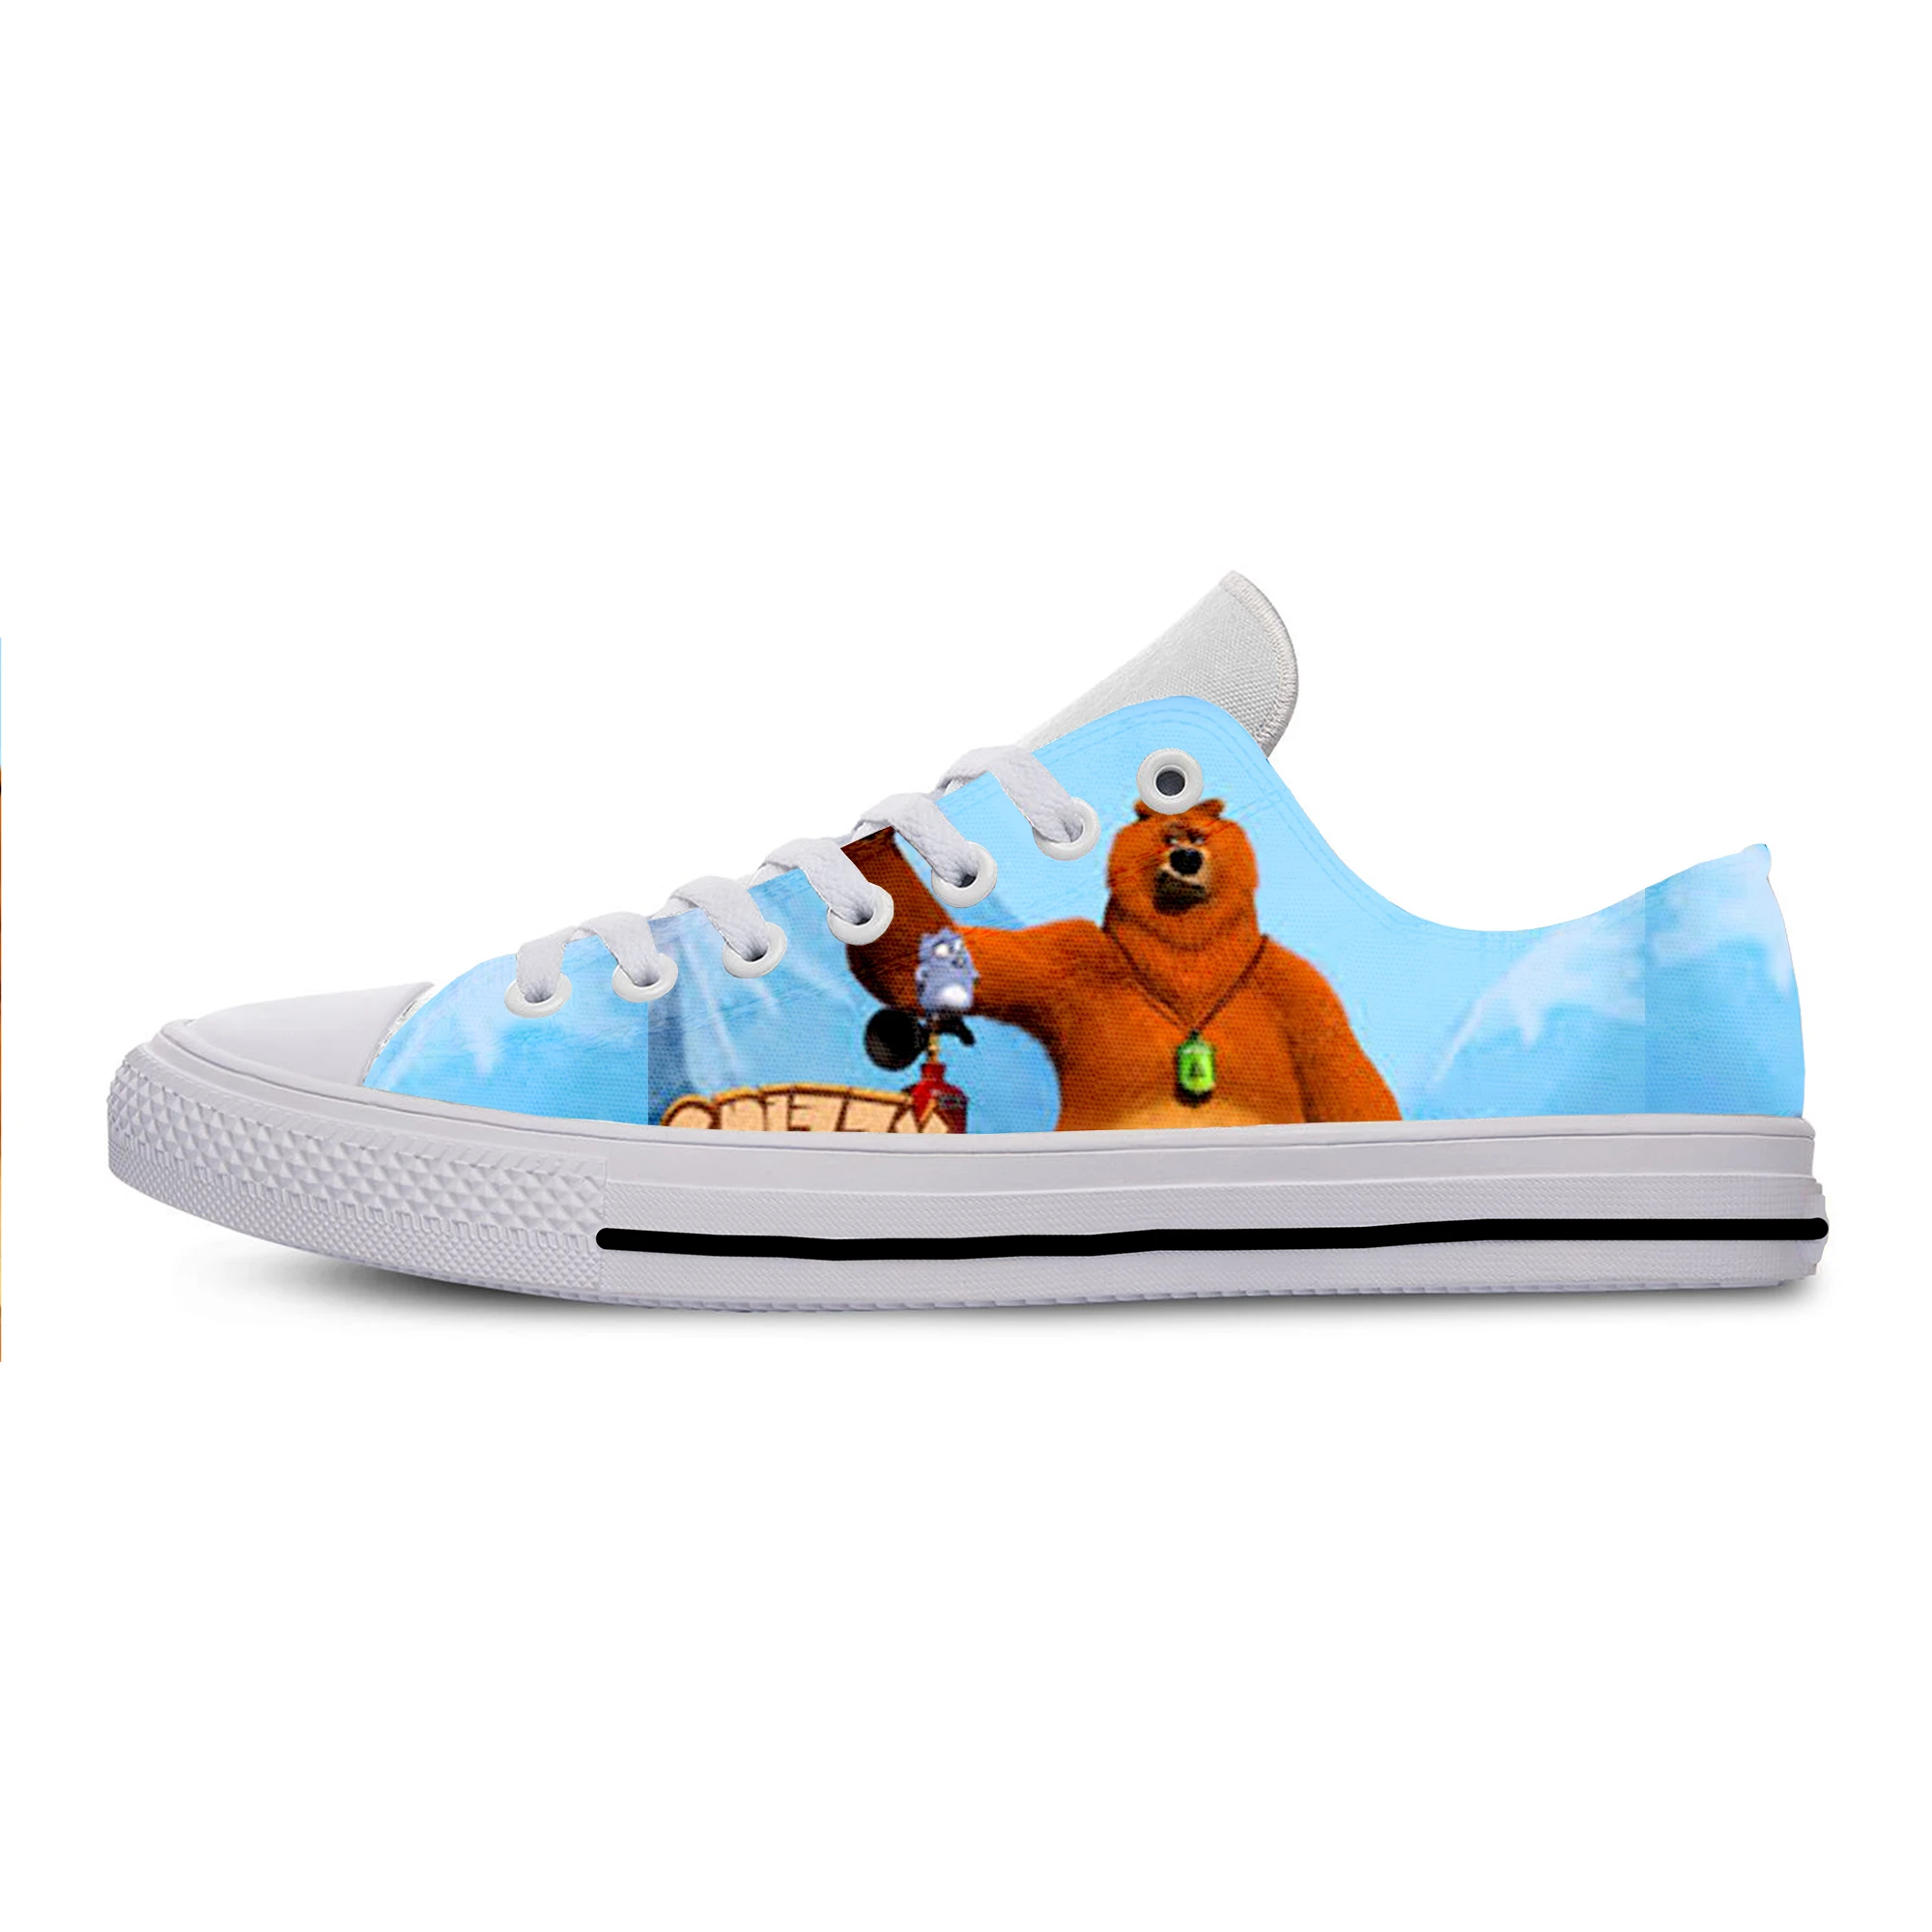 WANING MOON Funny Sloth Mens Leisure Sport Shoes 3D Prints Shoes 